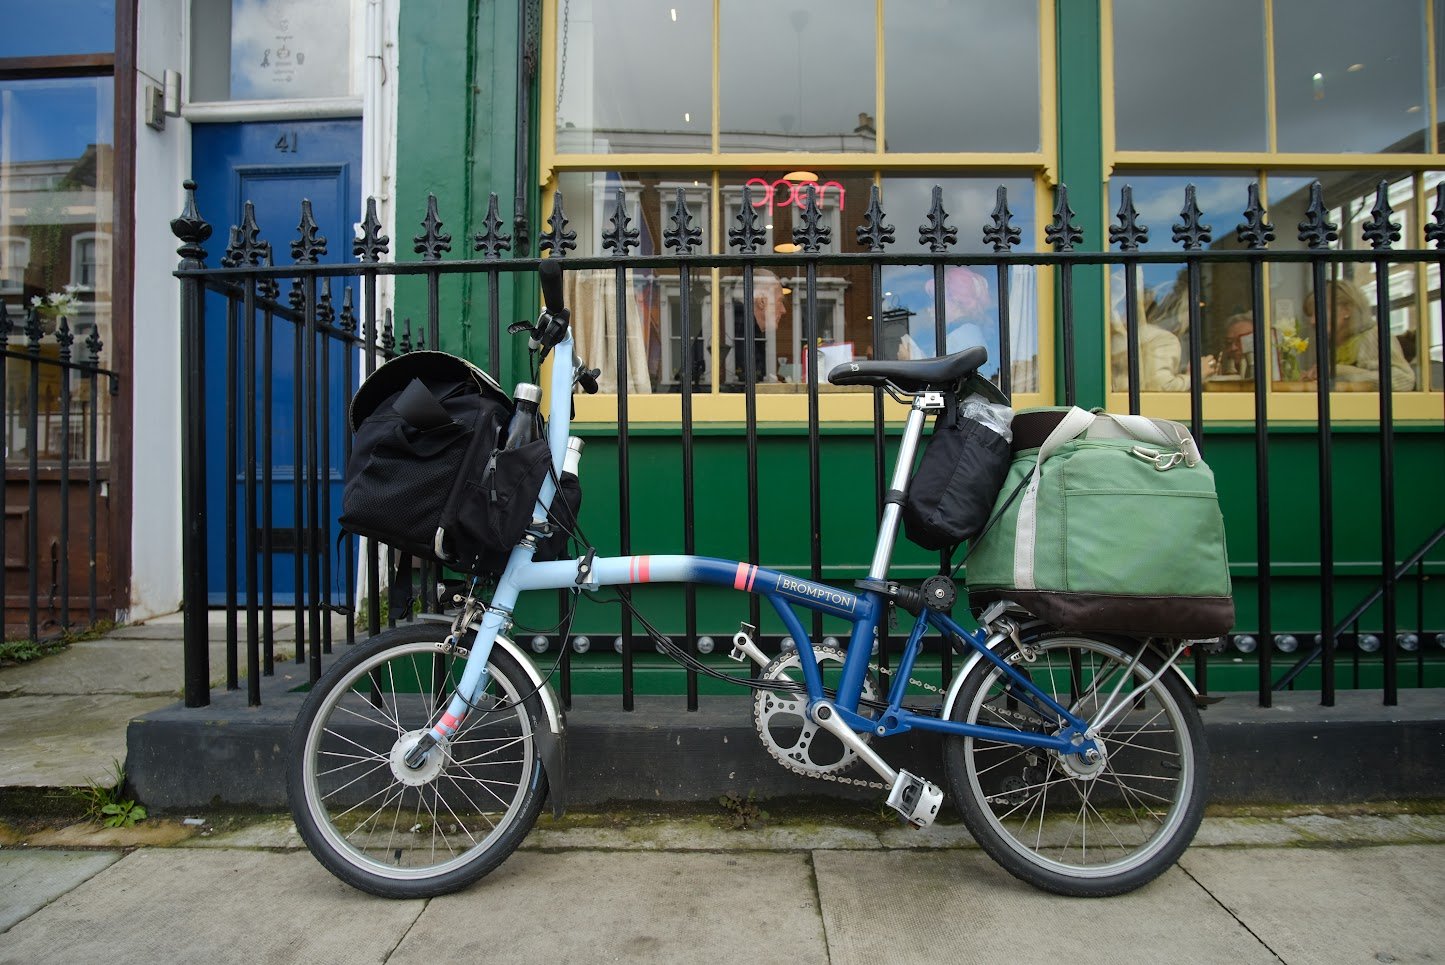 Our Bromptons came home to London.